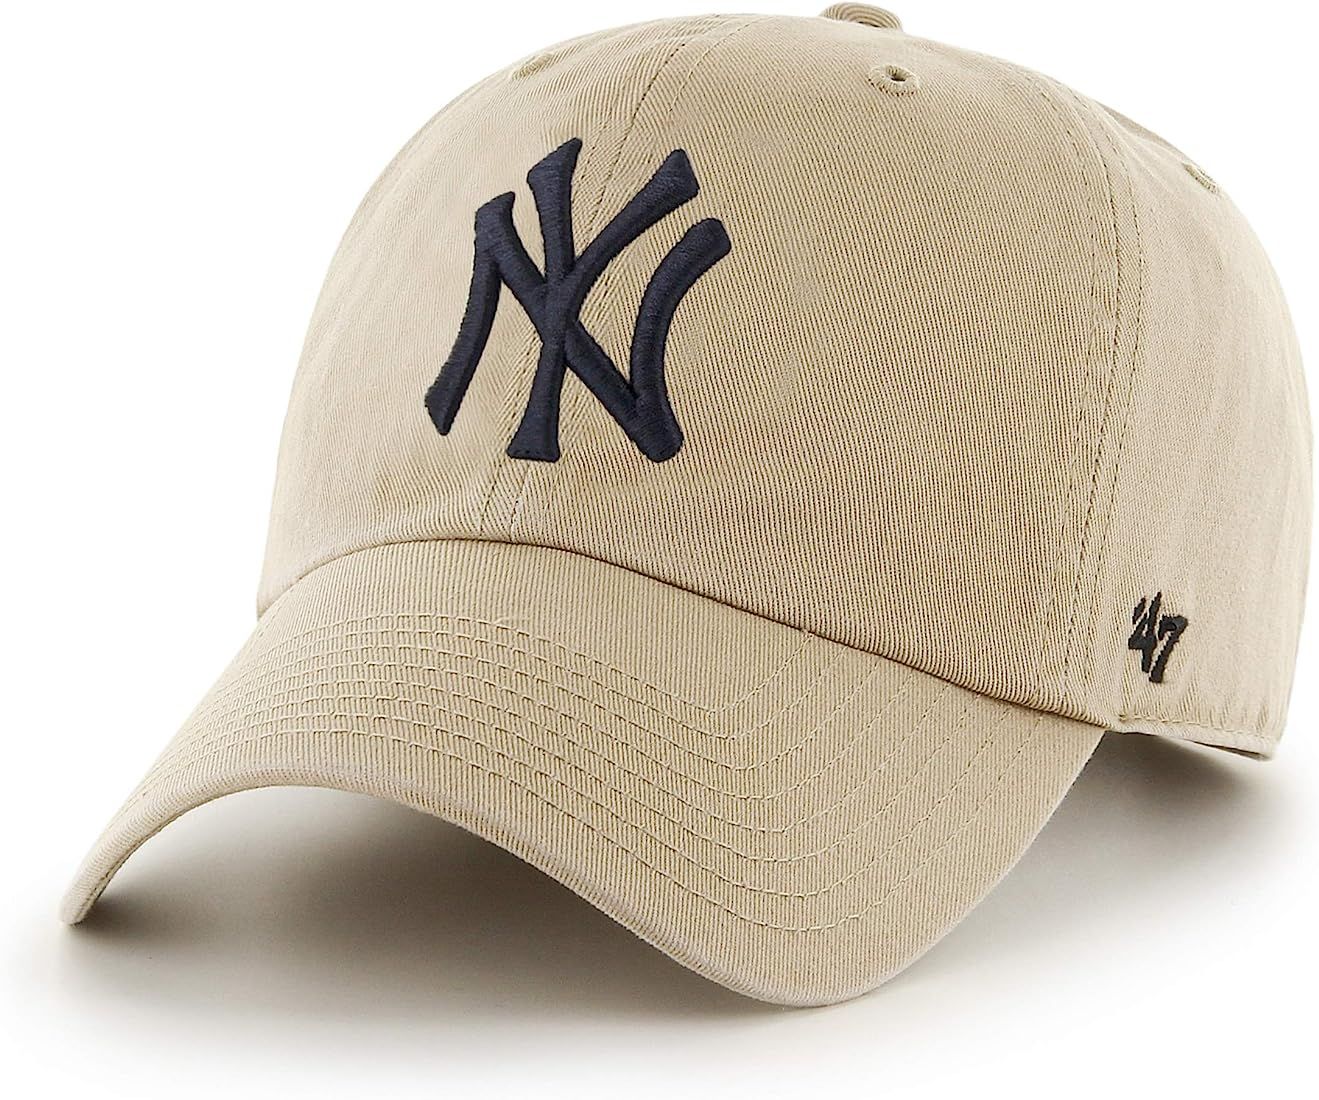 MLB Natural Clean Up Adjustable Hat Cap, Adult One Size | Amazon (US)